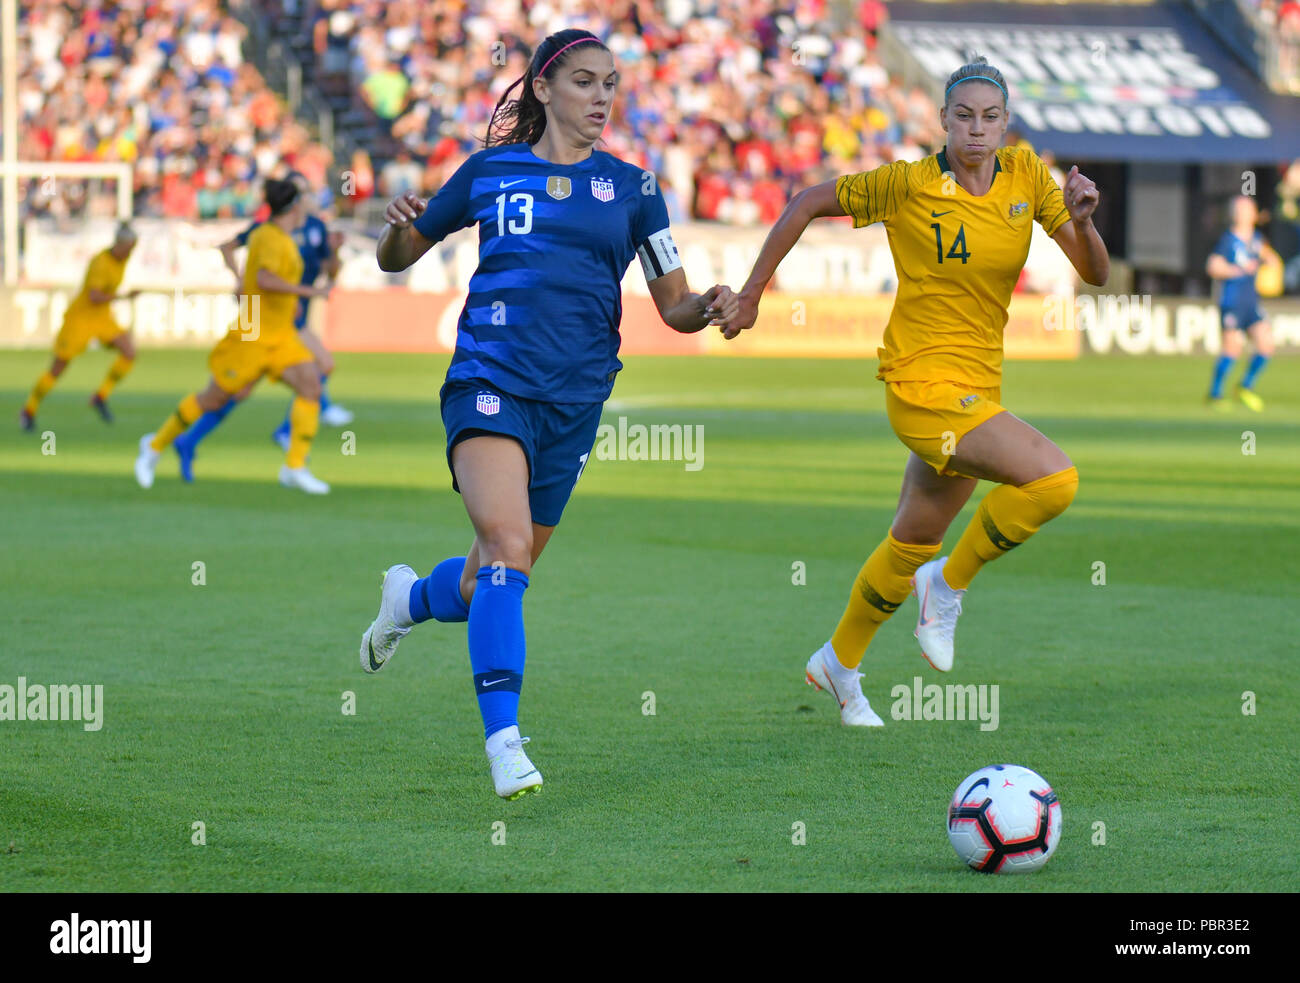 Sunday Aug 29, 2018: Alex Morgan (13) of the USWNT brings the ball down the field during a Tournament of Nations game against Australia at Pratt & Whitney Stadium in East Hartford, Connecticut. Gregory Vasil/CSM Stock Photo